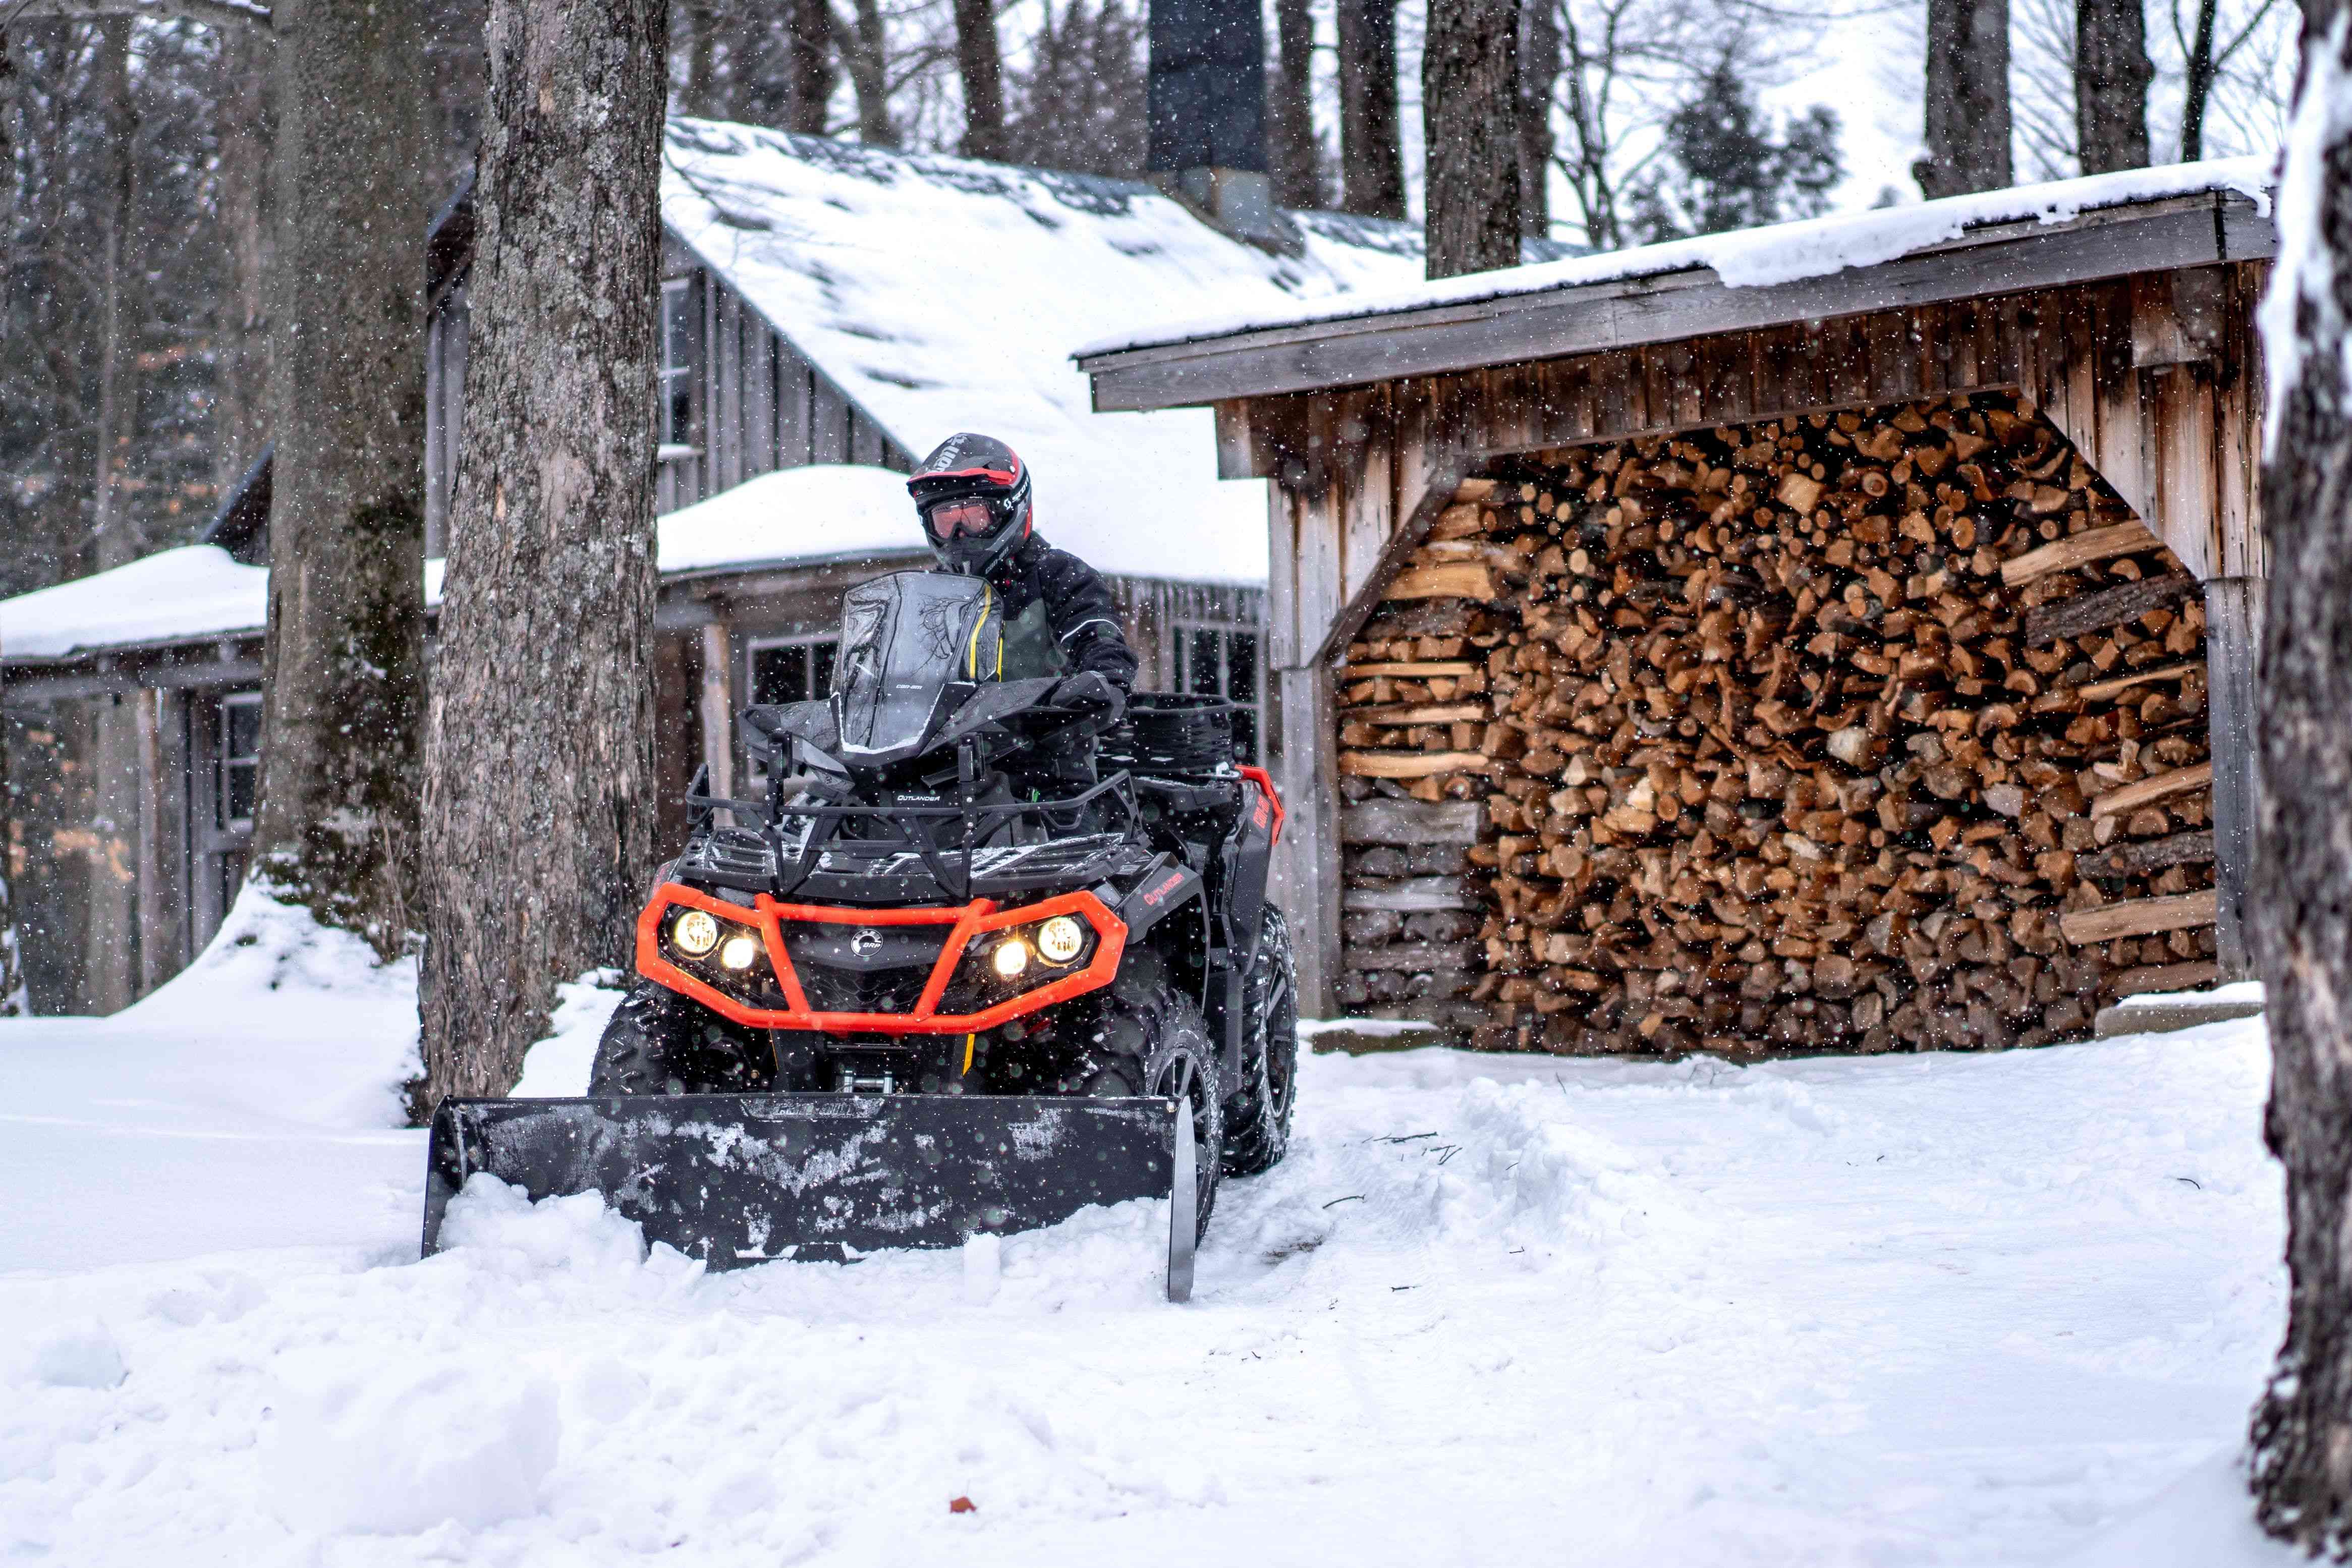 Man plowing snow with a Can-Am Outlander ATV near a wooden chalet